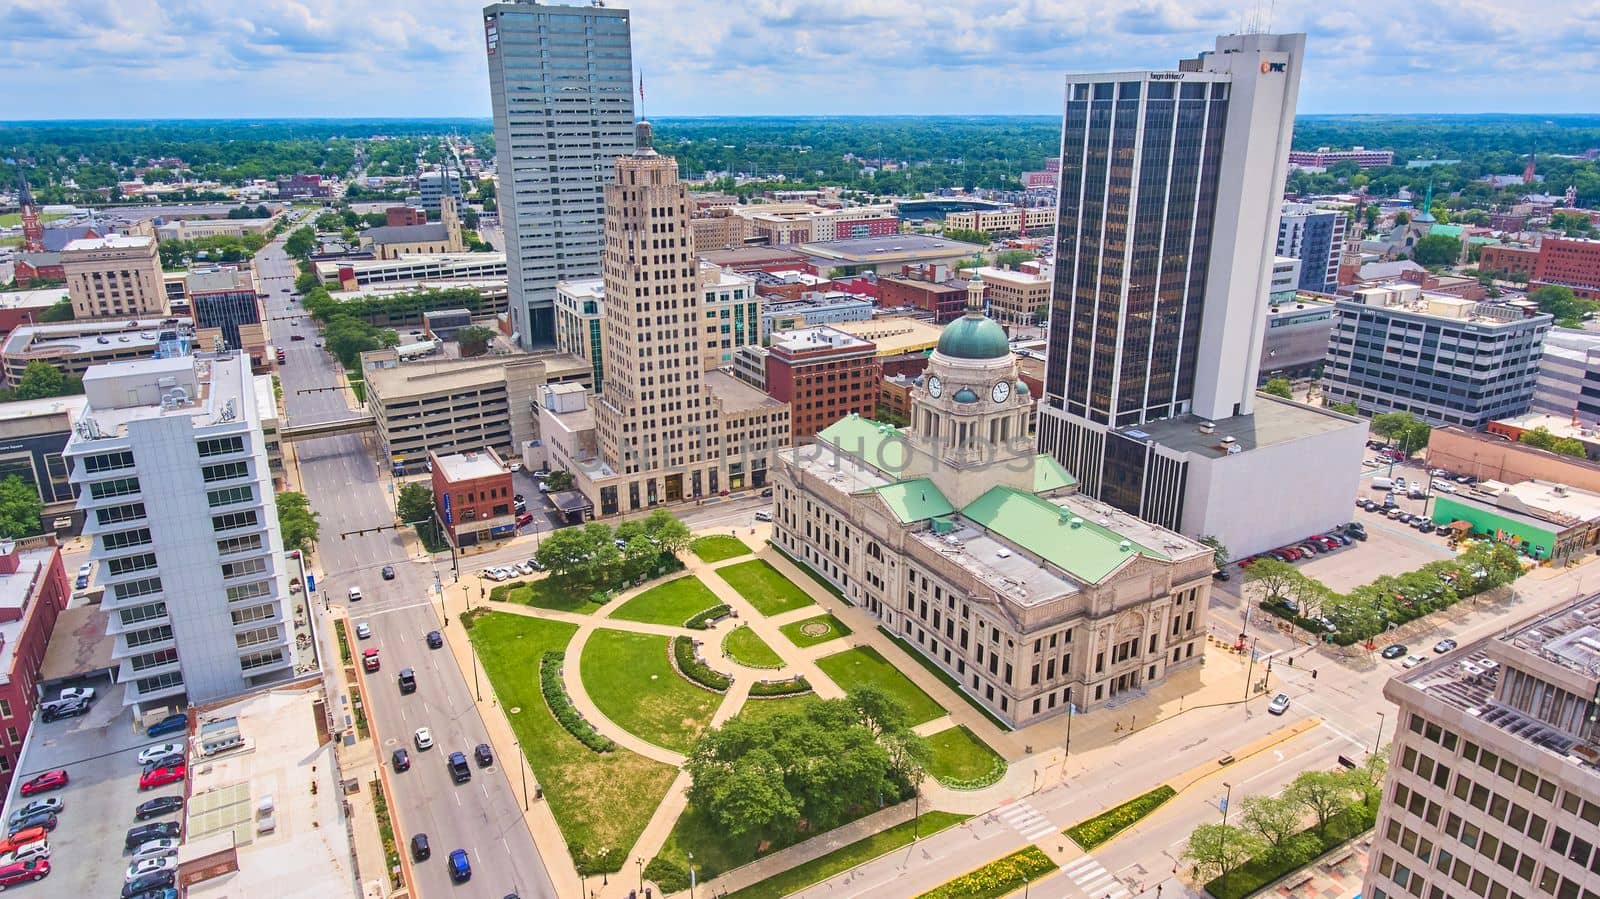 Image of City surrounds stunning Allen County courthouse in Fort Wayne, Indiana